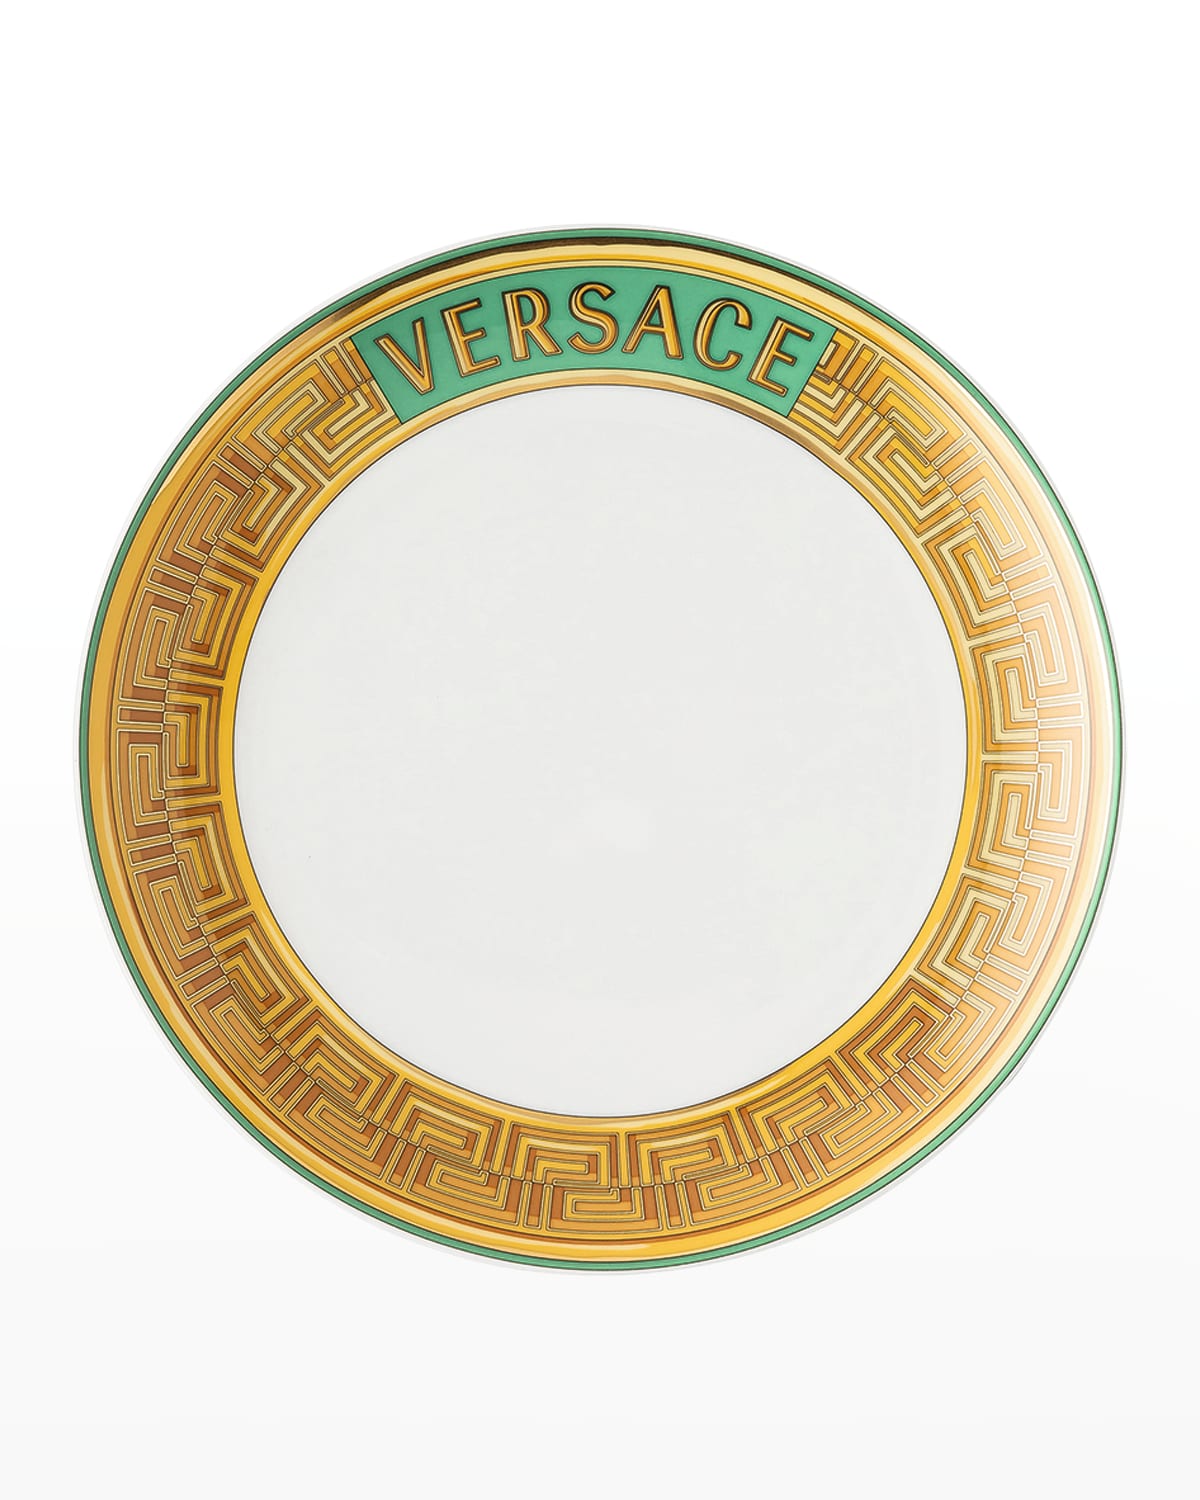 Medusa Amplified Green Coin Salad Plate